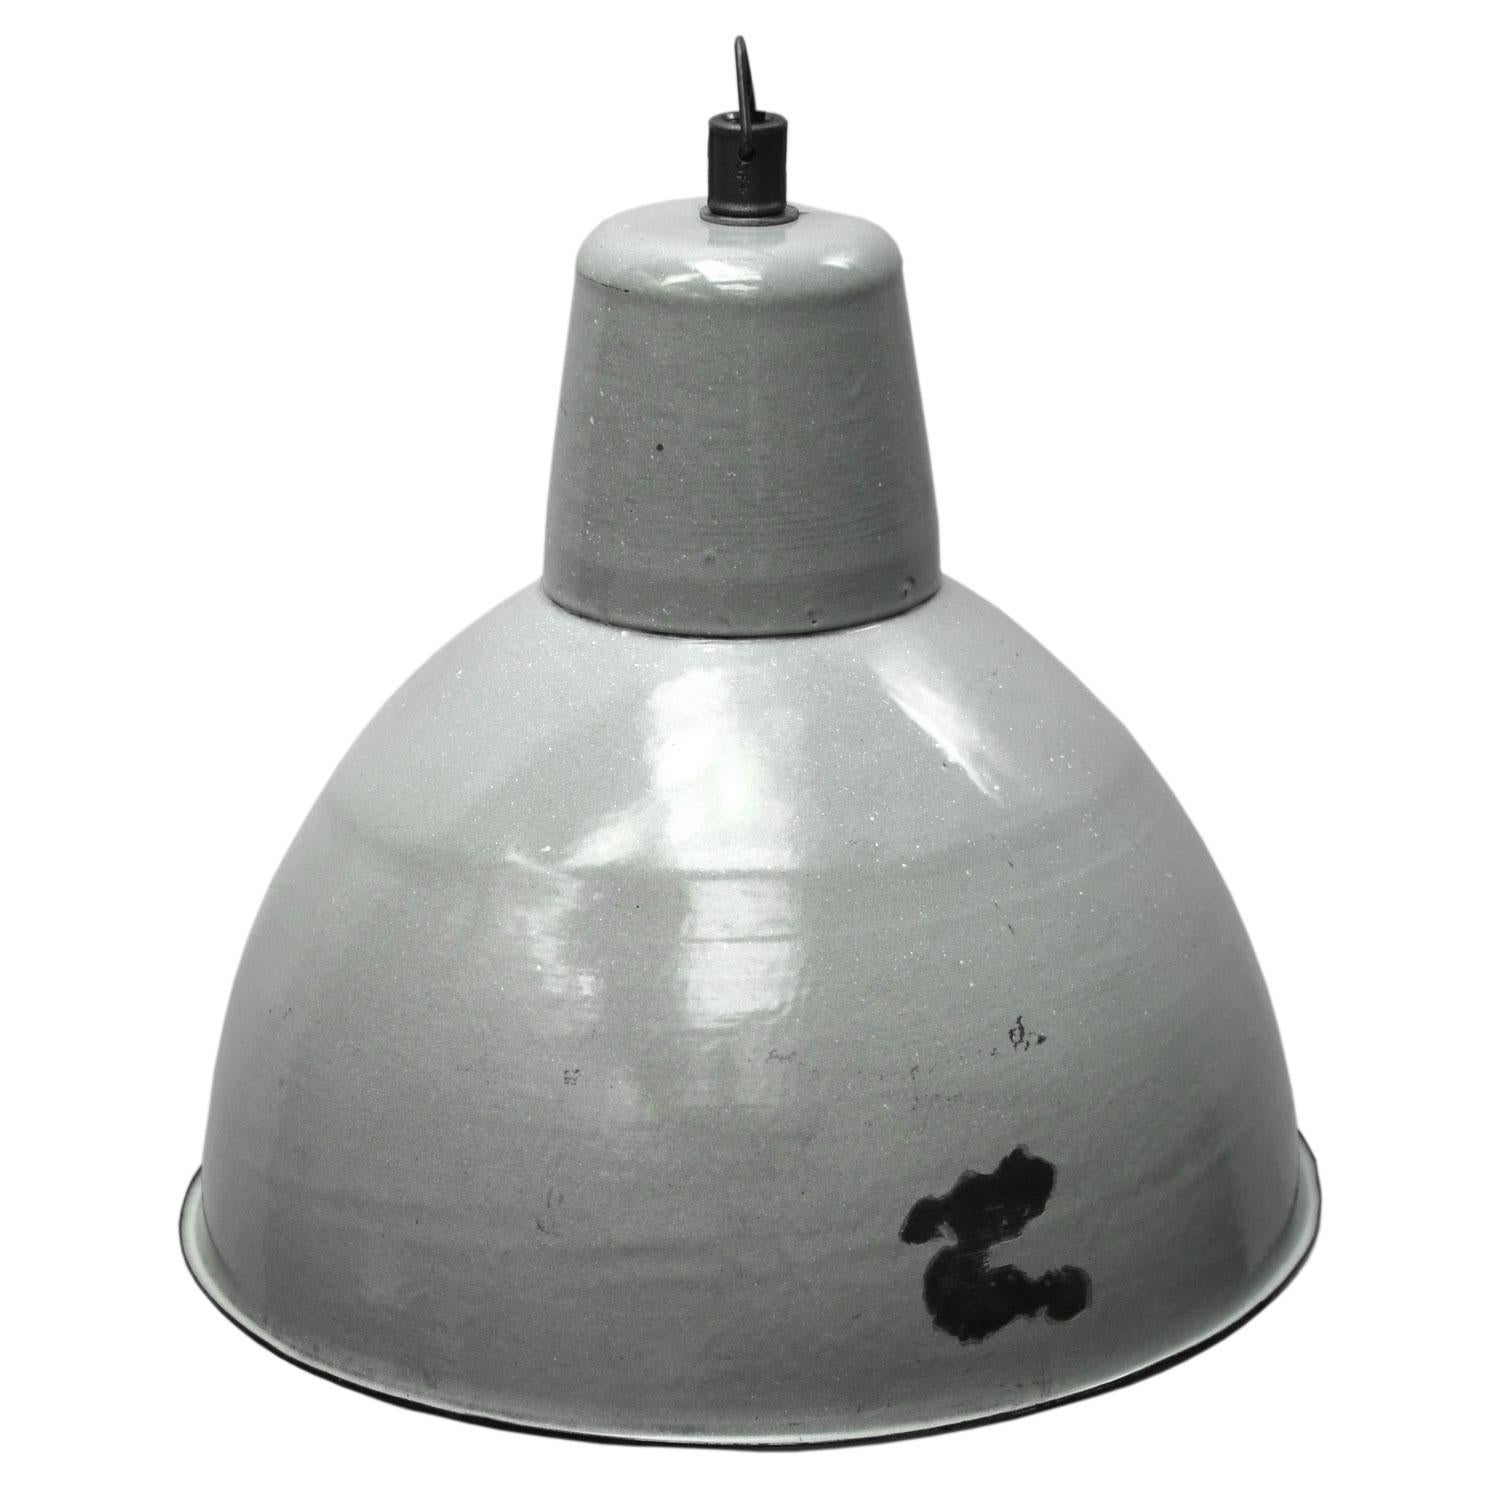 Industrial hanging light
grey enamel white interior

Weight: 2.80 kg / 6.2 lb

Priced per individual item. All lamps have been made suitable by international standards for incandescent light bulbs, energy-efficient and LED bulbs. E26/E27 bulb